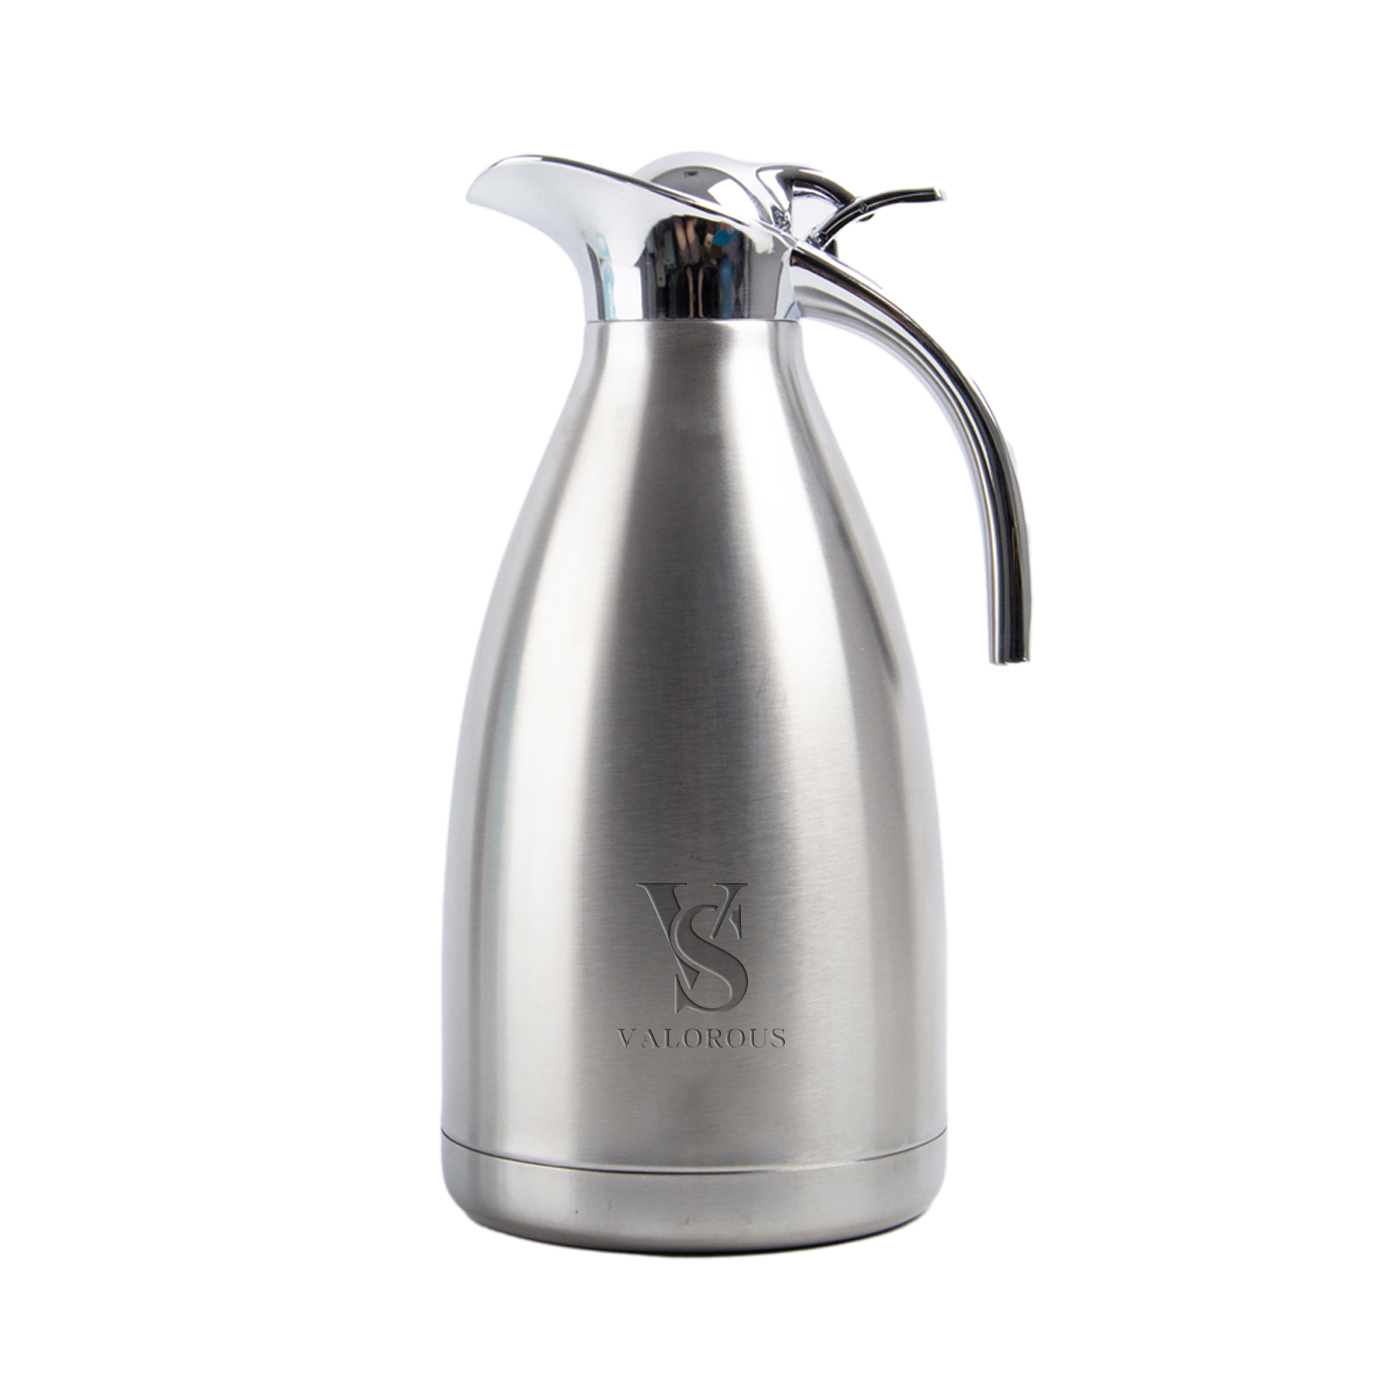 Stainless Steel Thermal Coffee Carafe